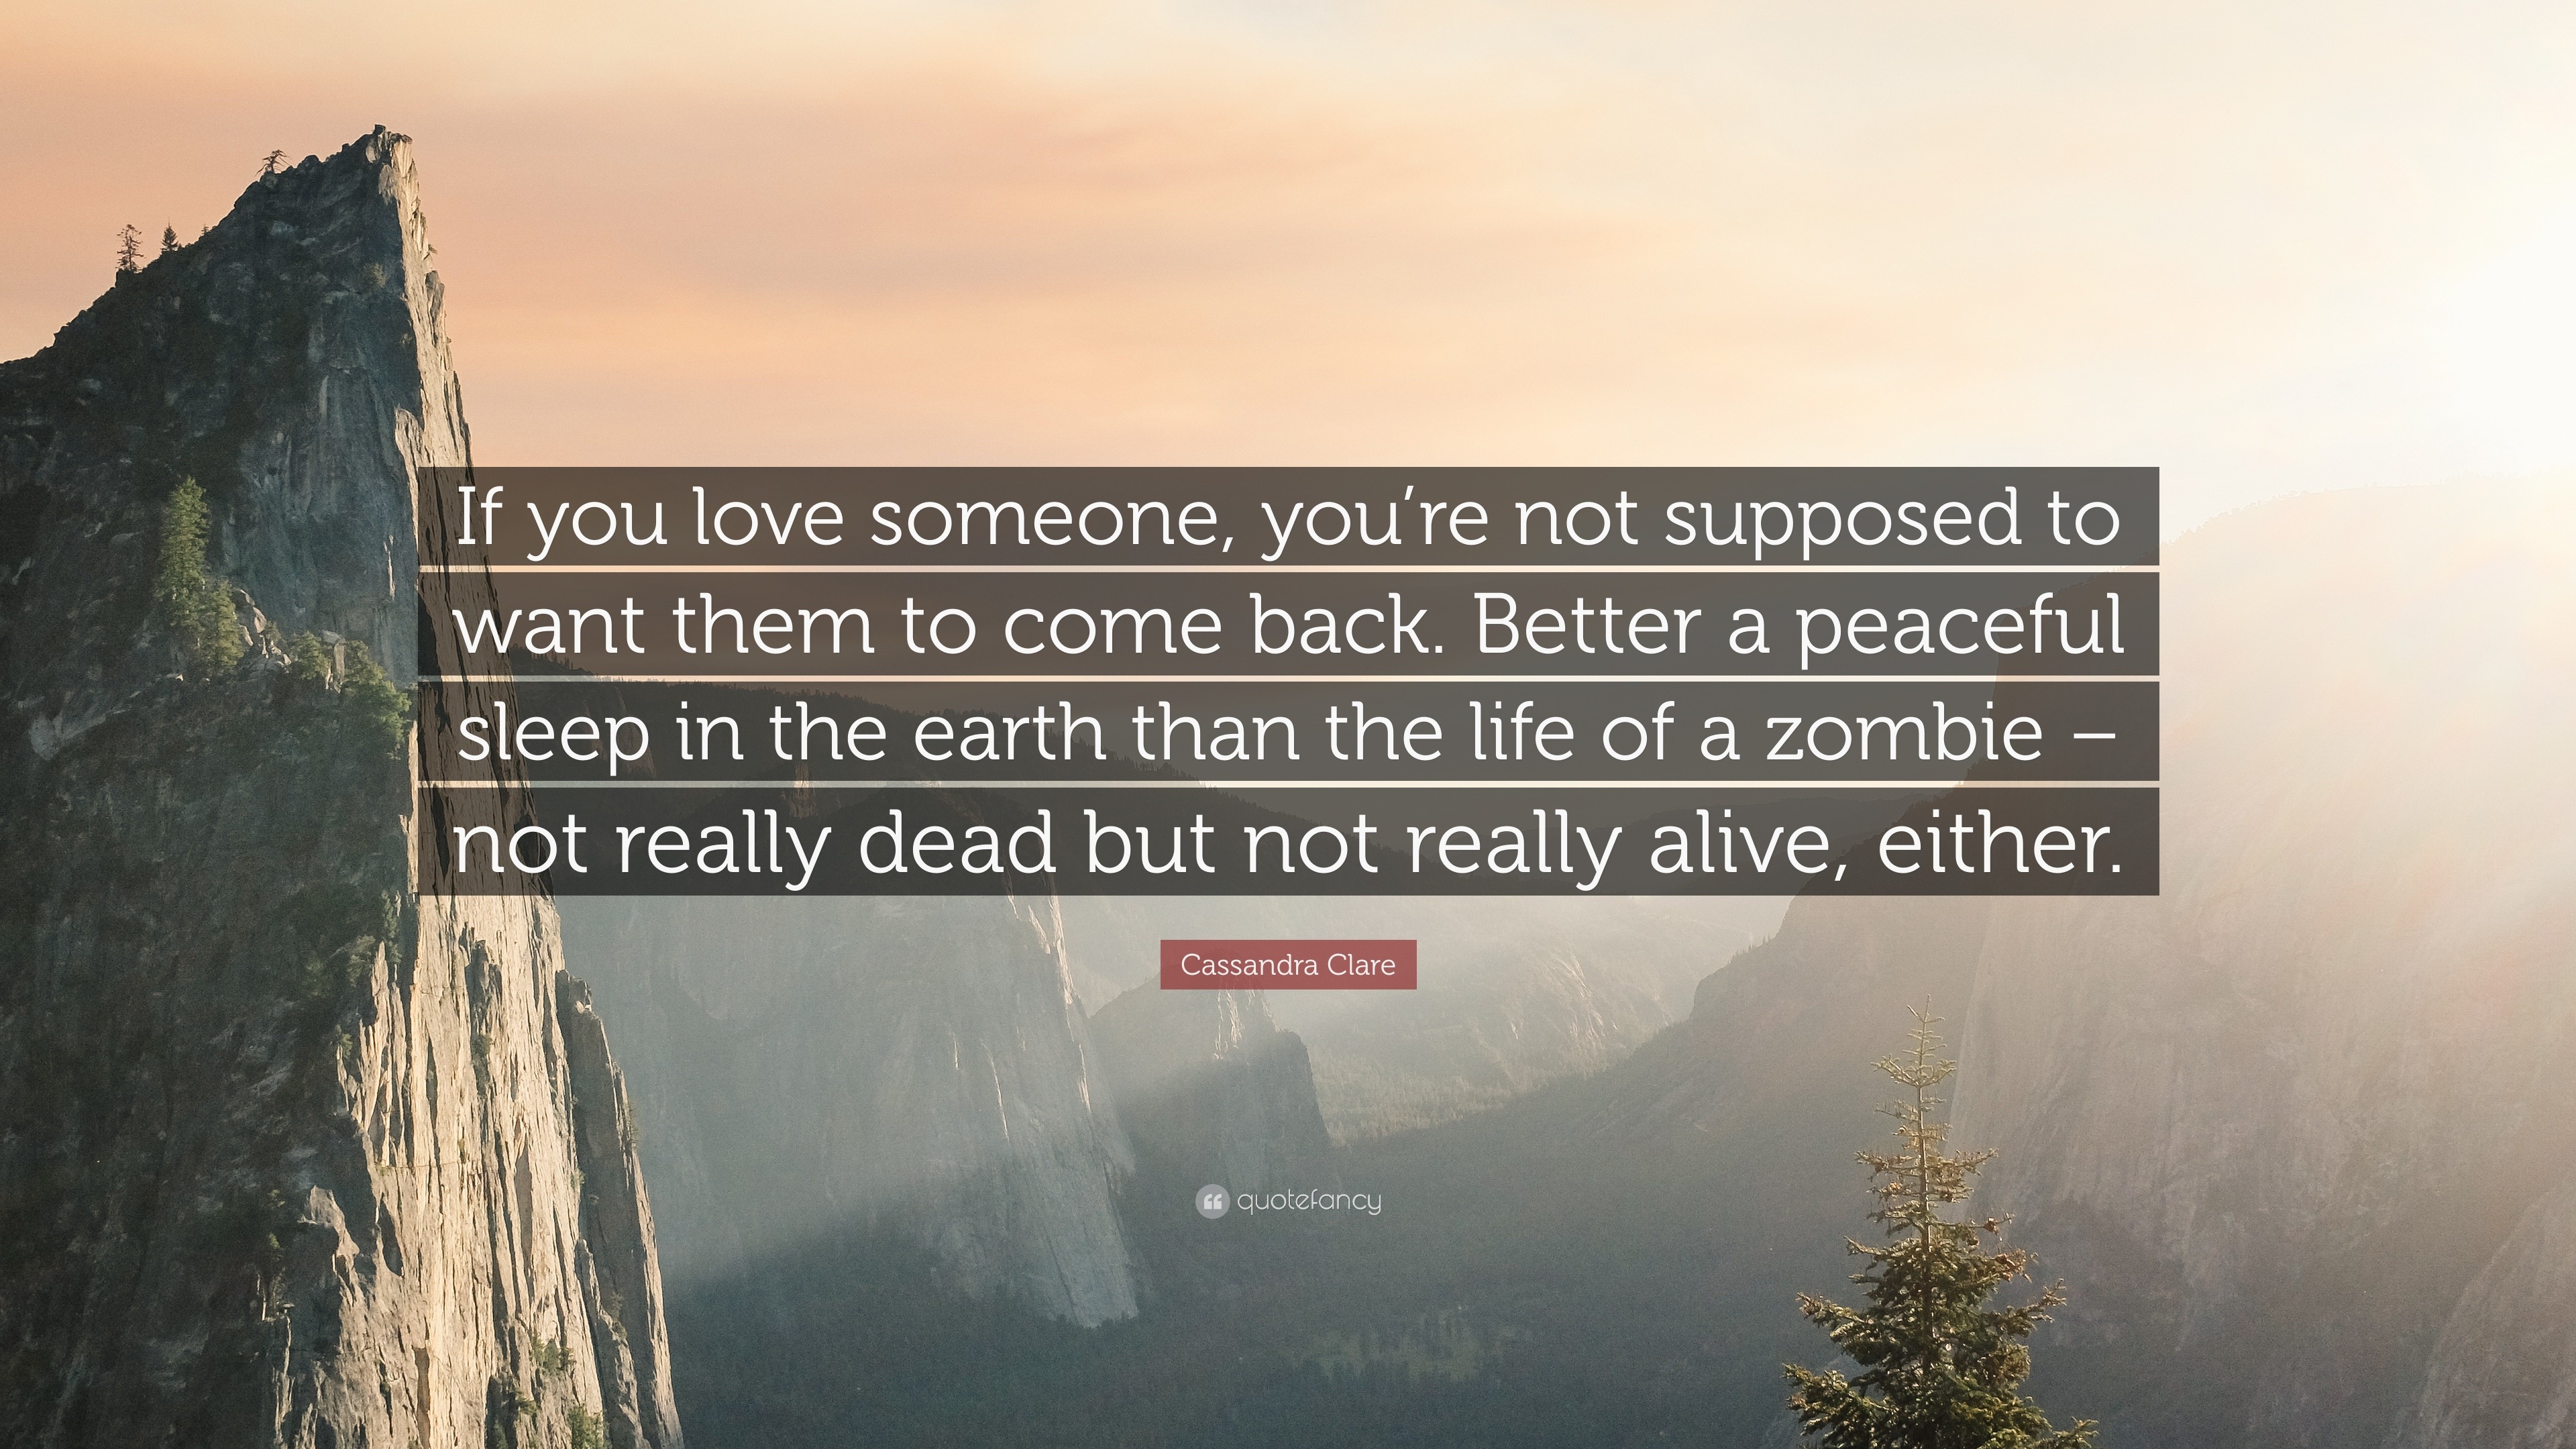 Cassandra Clare Quote “If you love someone you re not supposed to